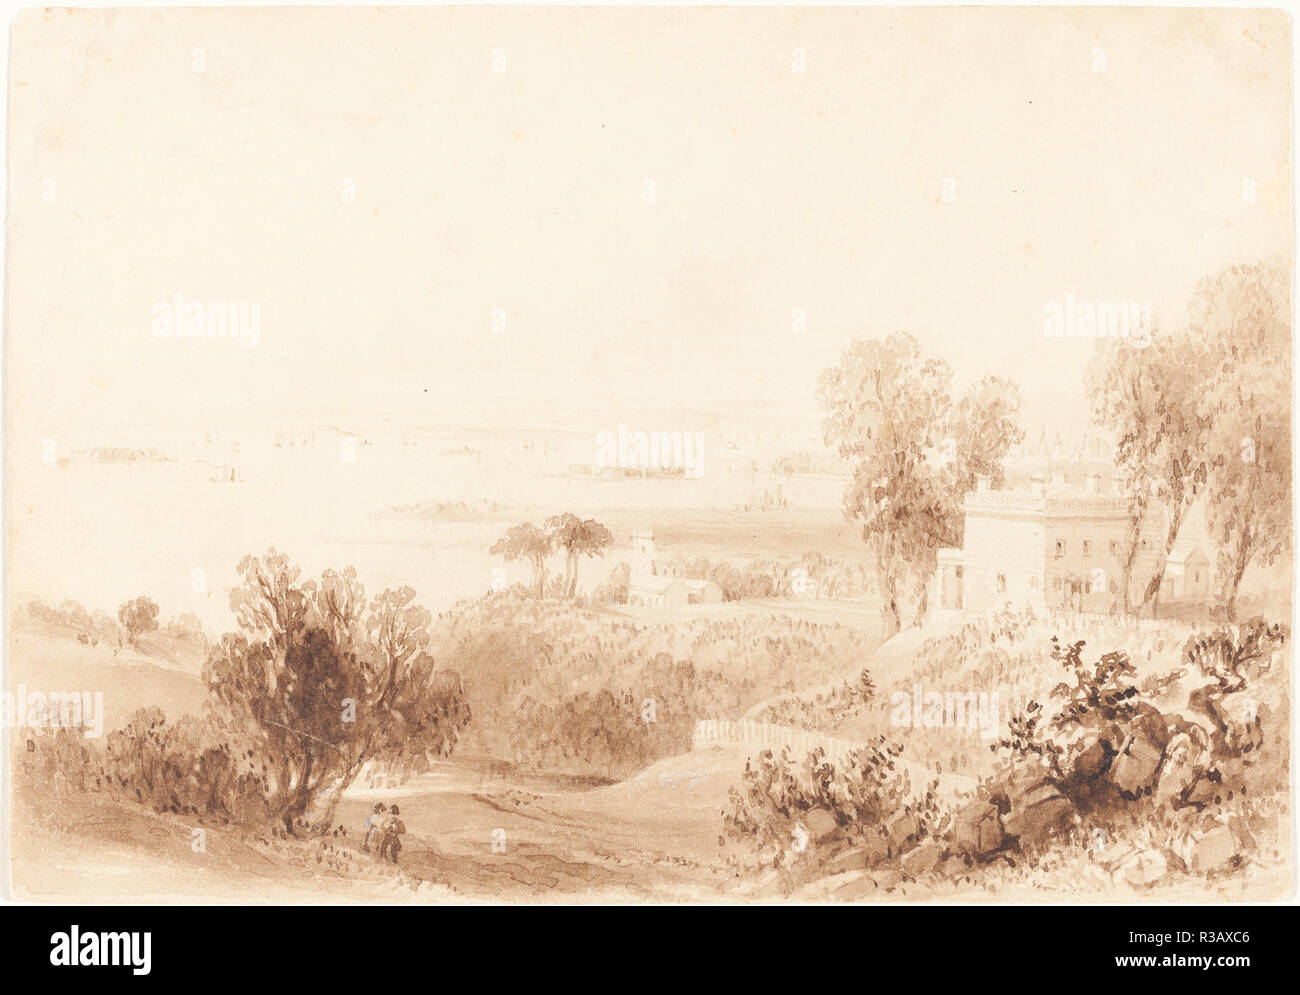 Gowanus Heights, Brooklyn. Dated: c. 1836/1837. Dimensions: overall: 12.5 x 17.9 cm (4 15/16 x 7 1/16 in.). Medium: brush and brown ink with brown wash on wove paper. Museum: National Gallery of Art, Washington DC. Author: William Henry Bartlett. Stock Photo